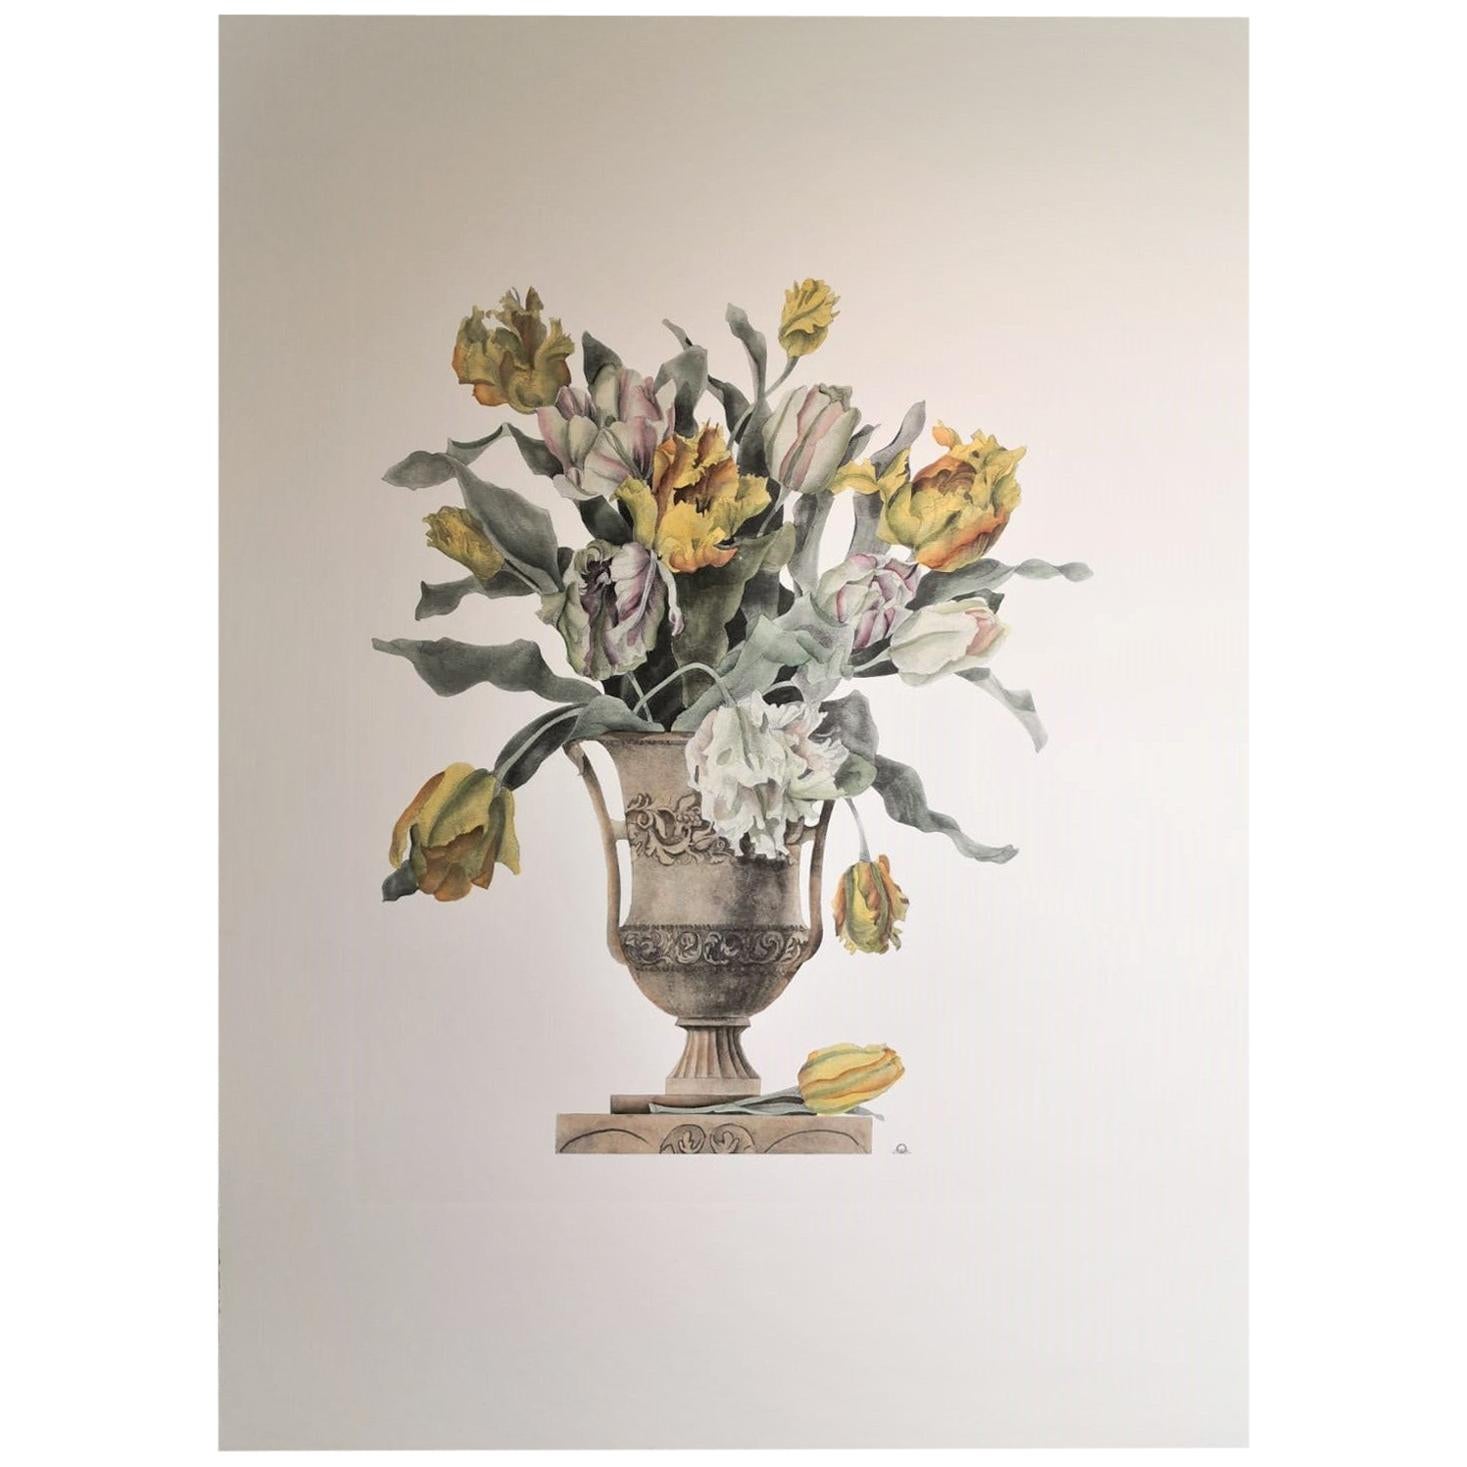 Italian Contemporary Hand Painted Yellow and White Tulips Vase Print